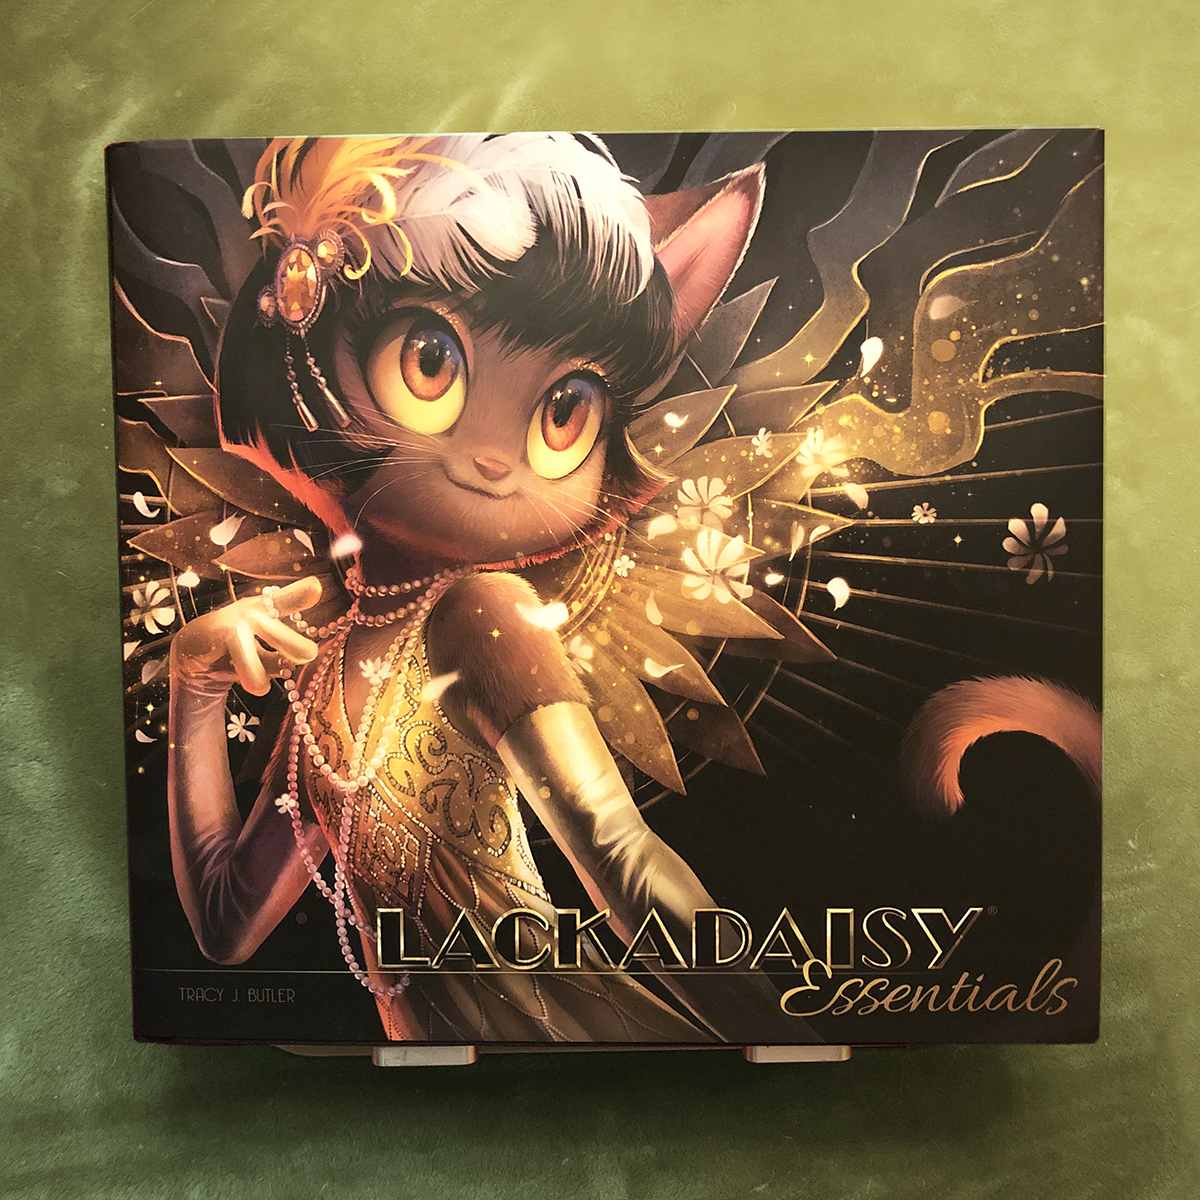 Lackadaisy Tracy on X: The Lackadaisy Essentials book is here! We